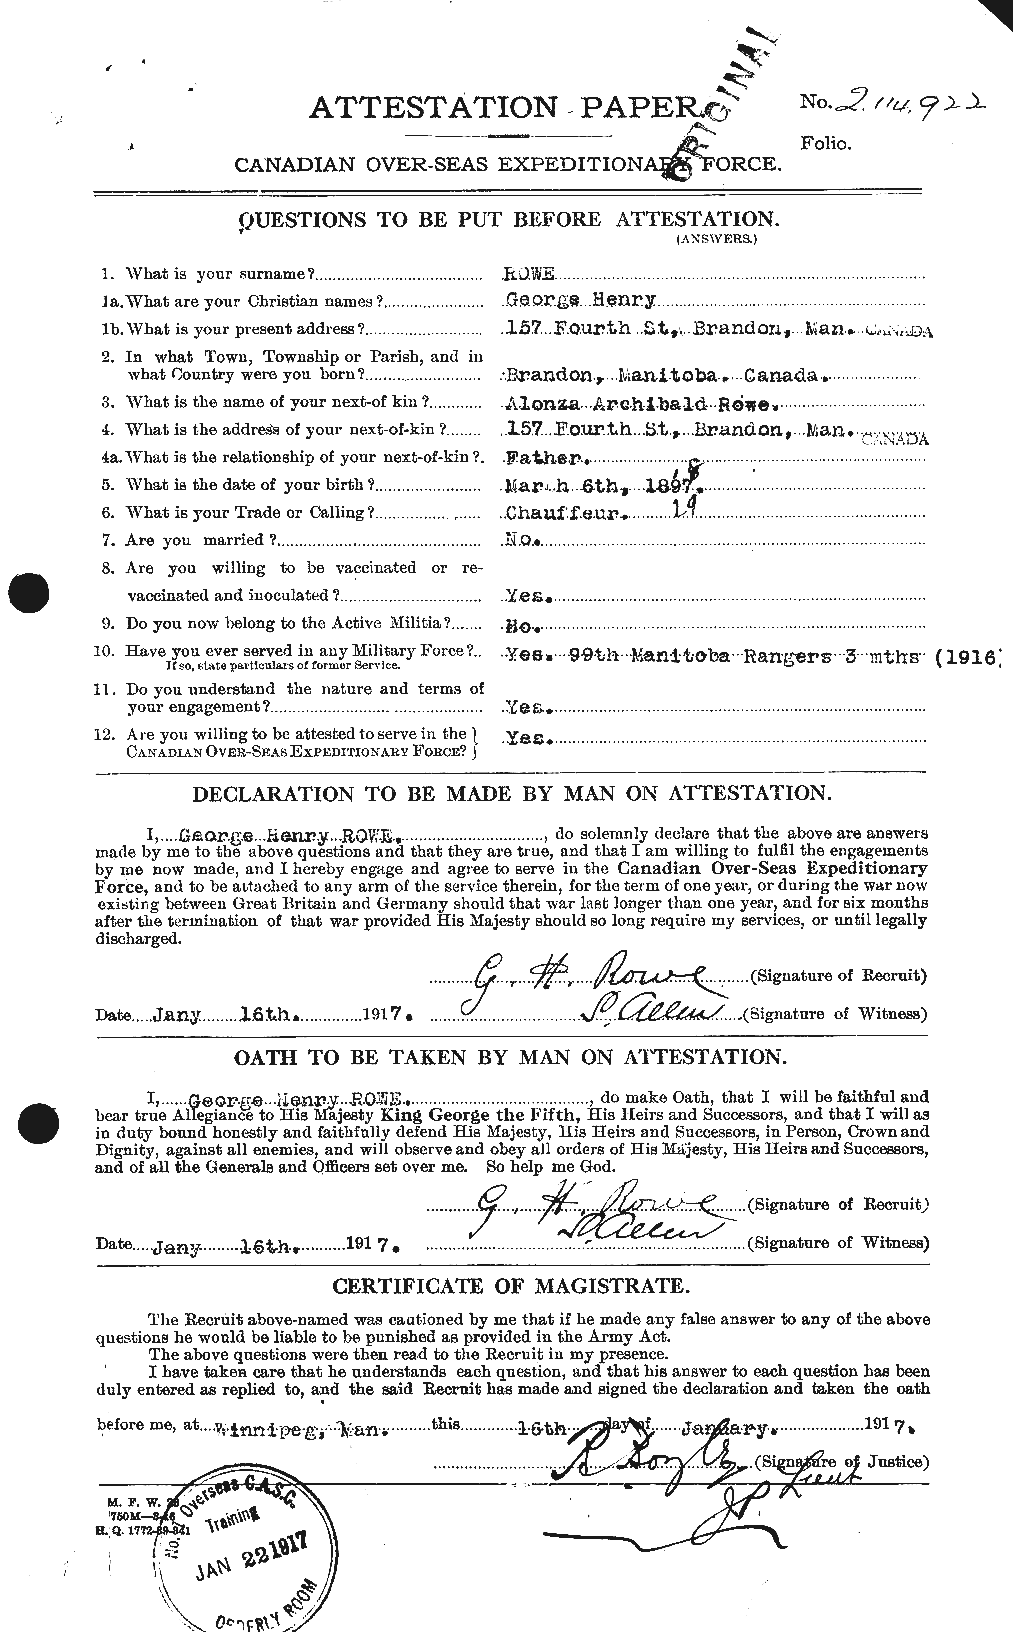 Personnel Records of the First World War - CEF 615880a